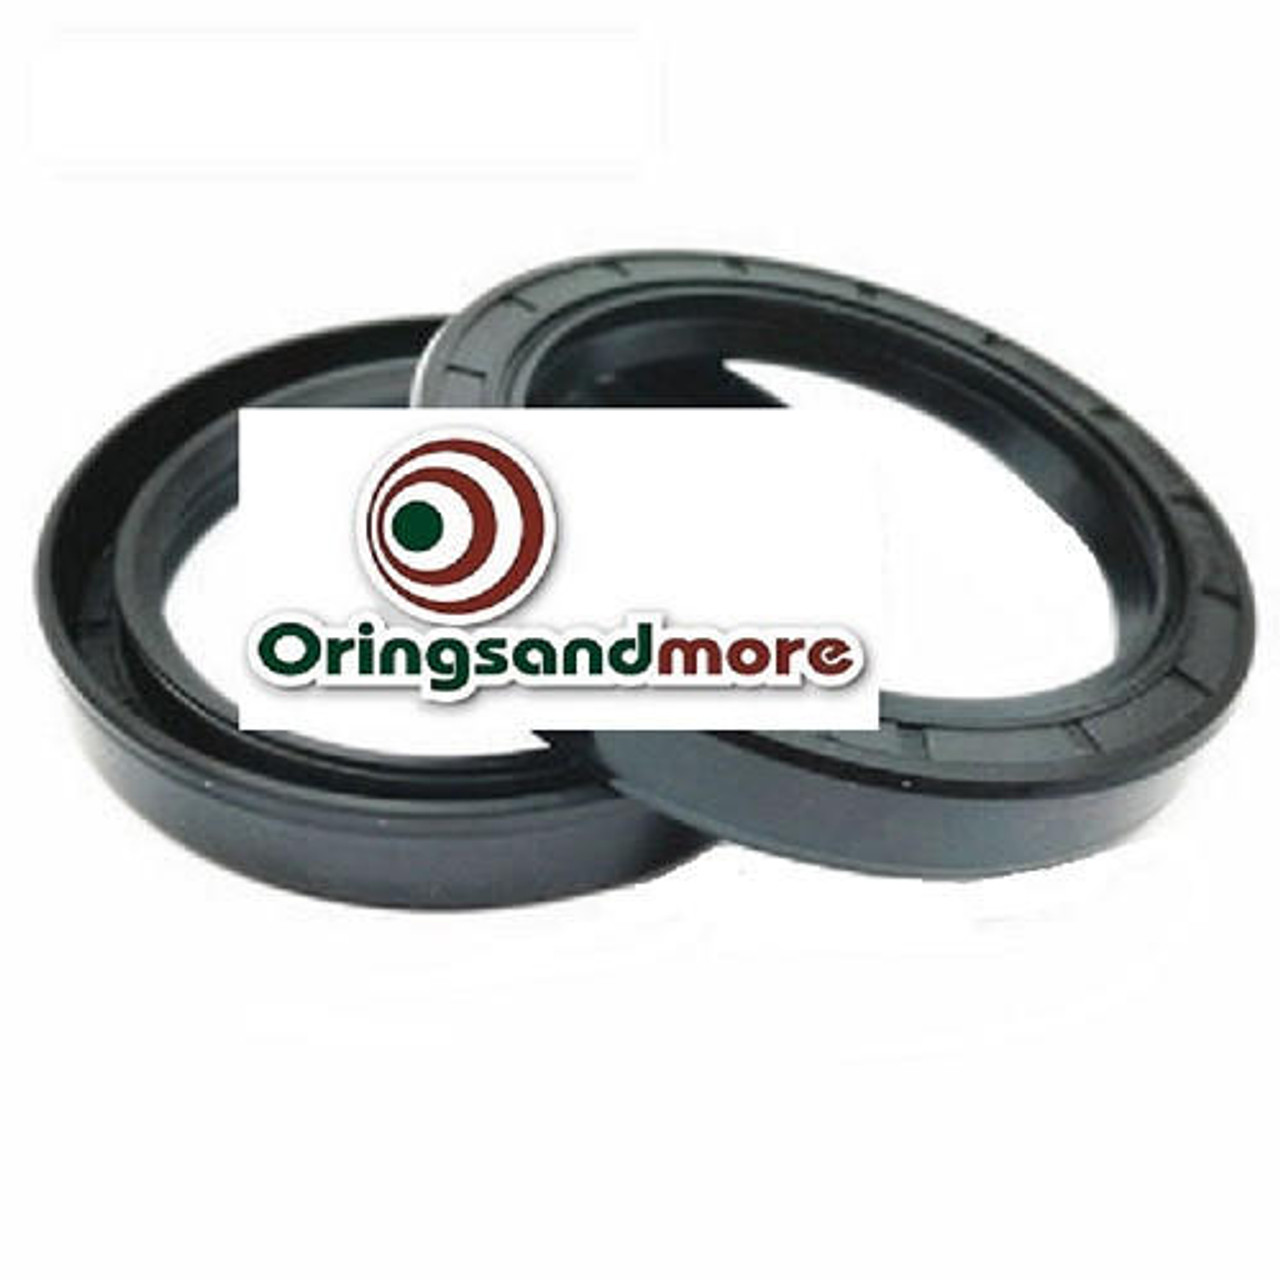 Metric Oil Shaft Seal 55 x 90 x 10mm Double Lip   Price for 1 pc